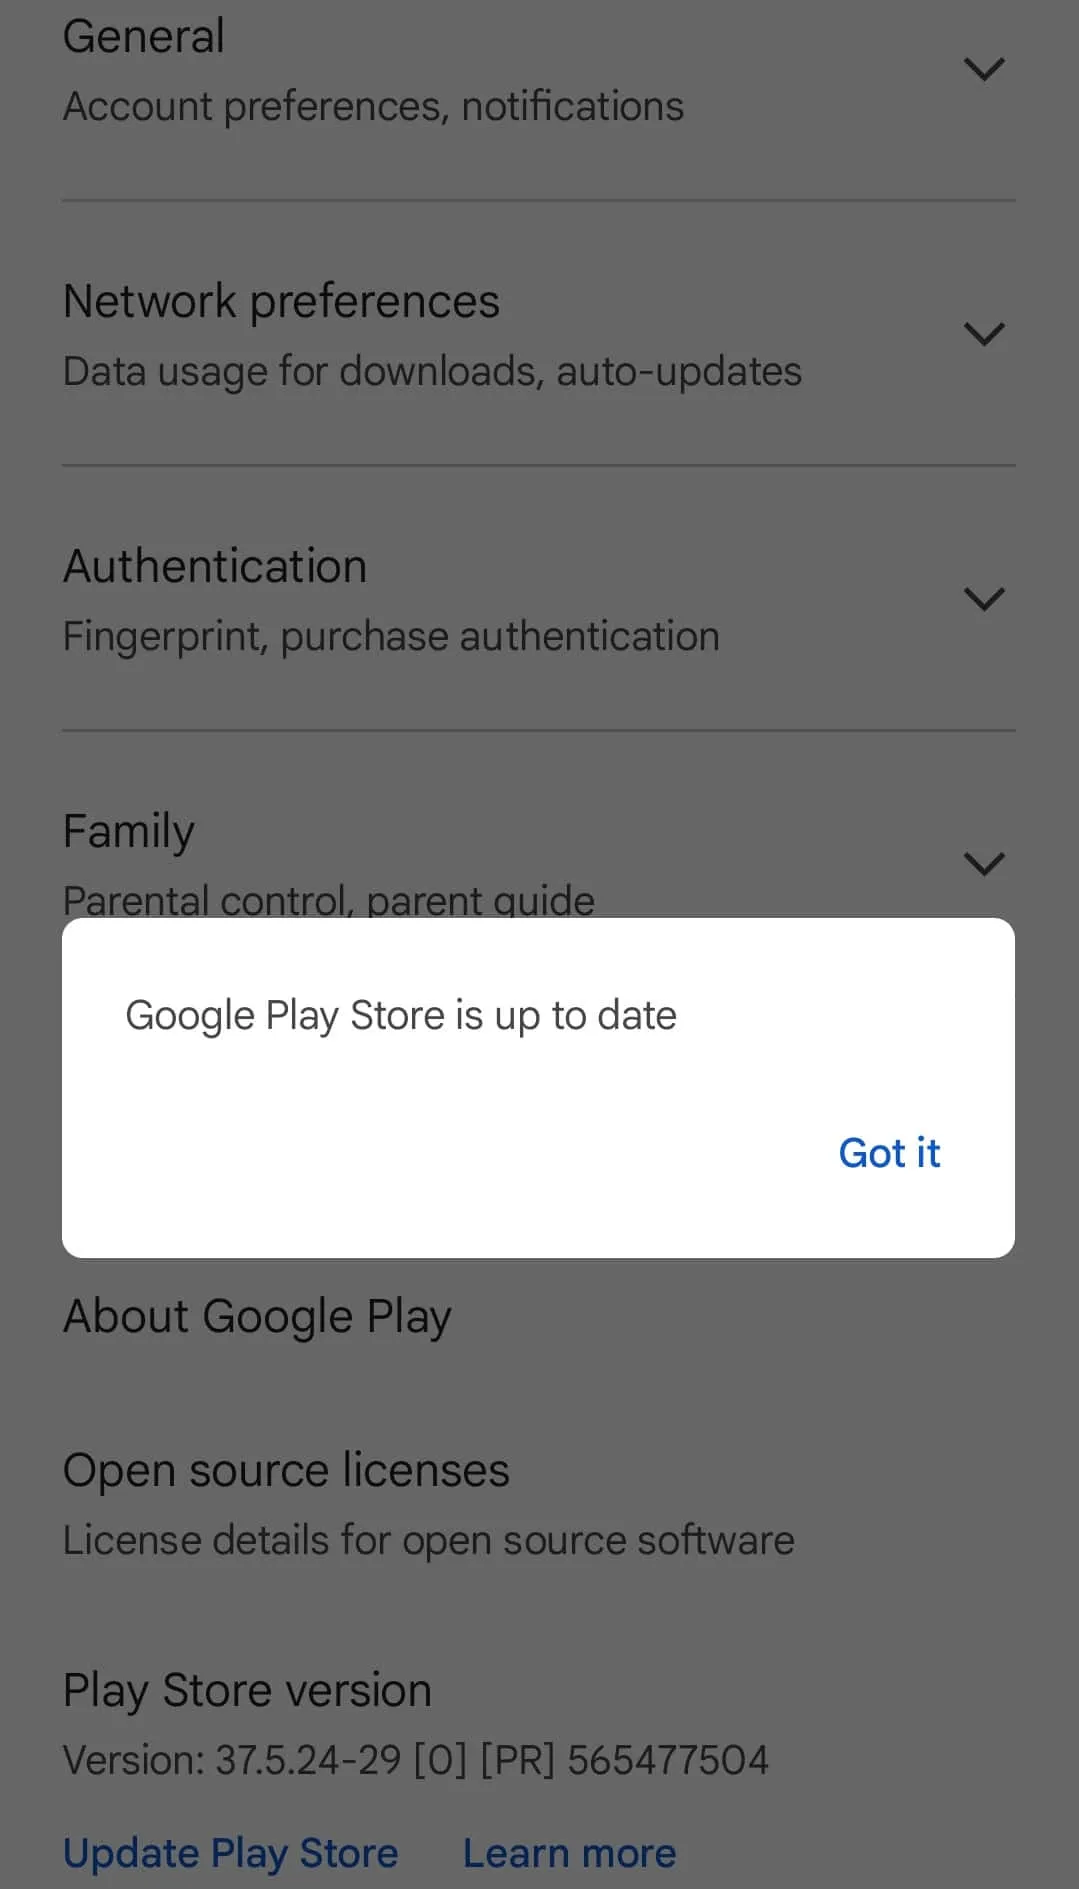 The Google Play Store application is updated